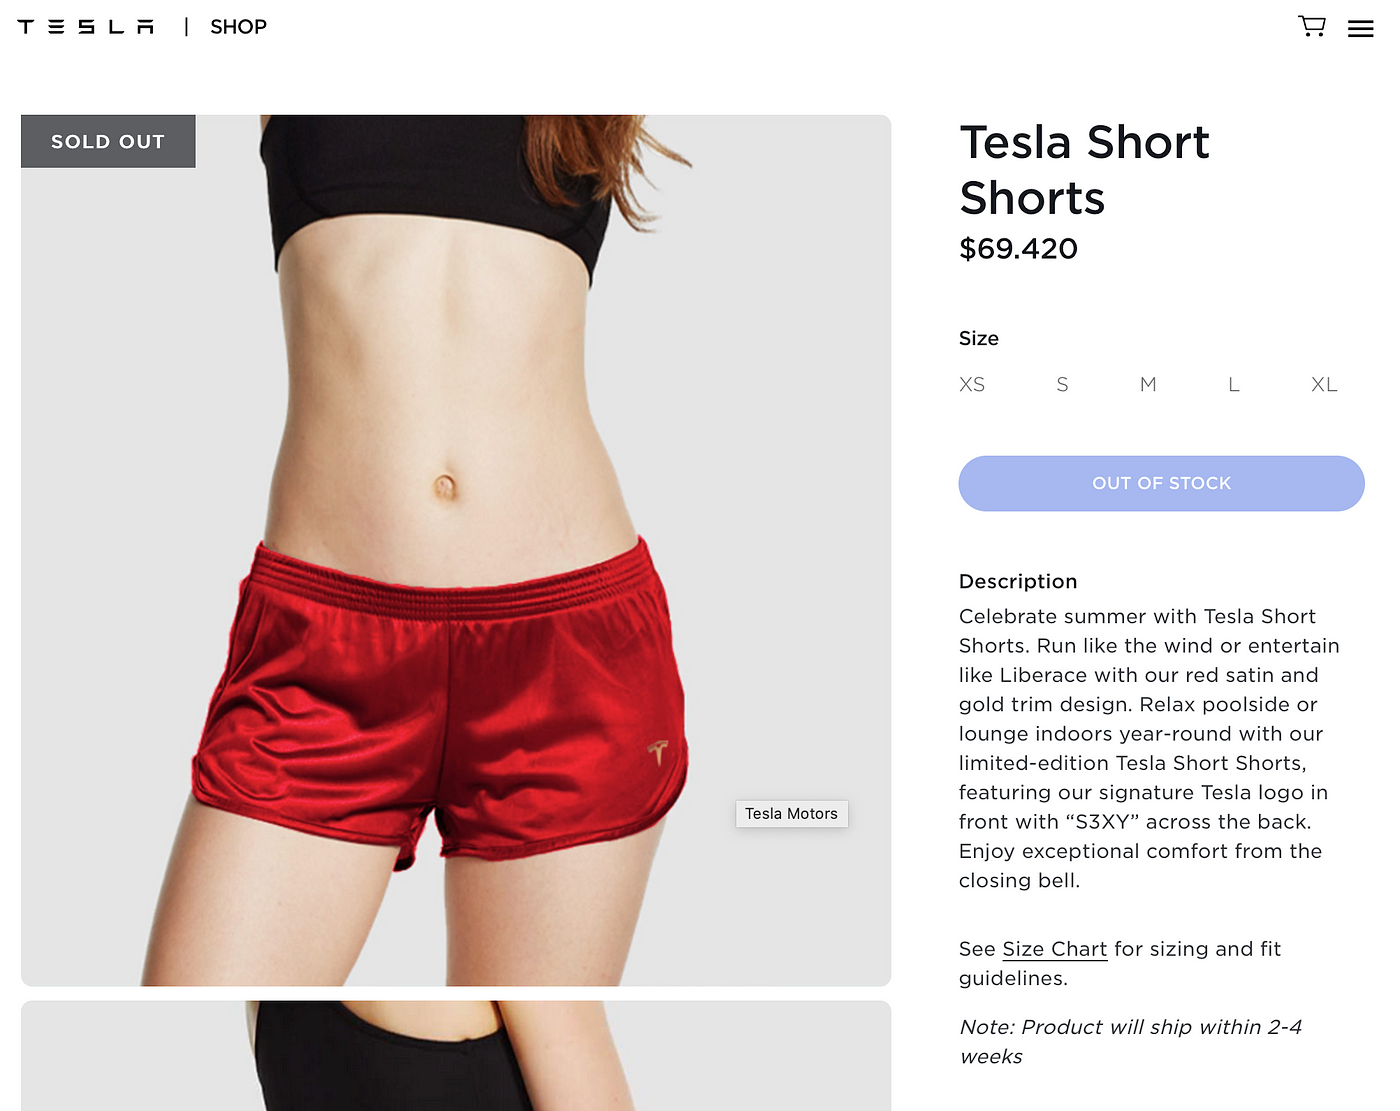 Limited Edition Short Shorts for $69.420 sold out immediately — Q2 Profit  for Tesla? | by Jonah Williams | Medium